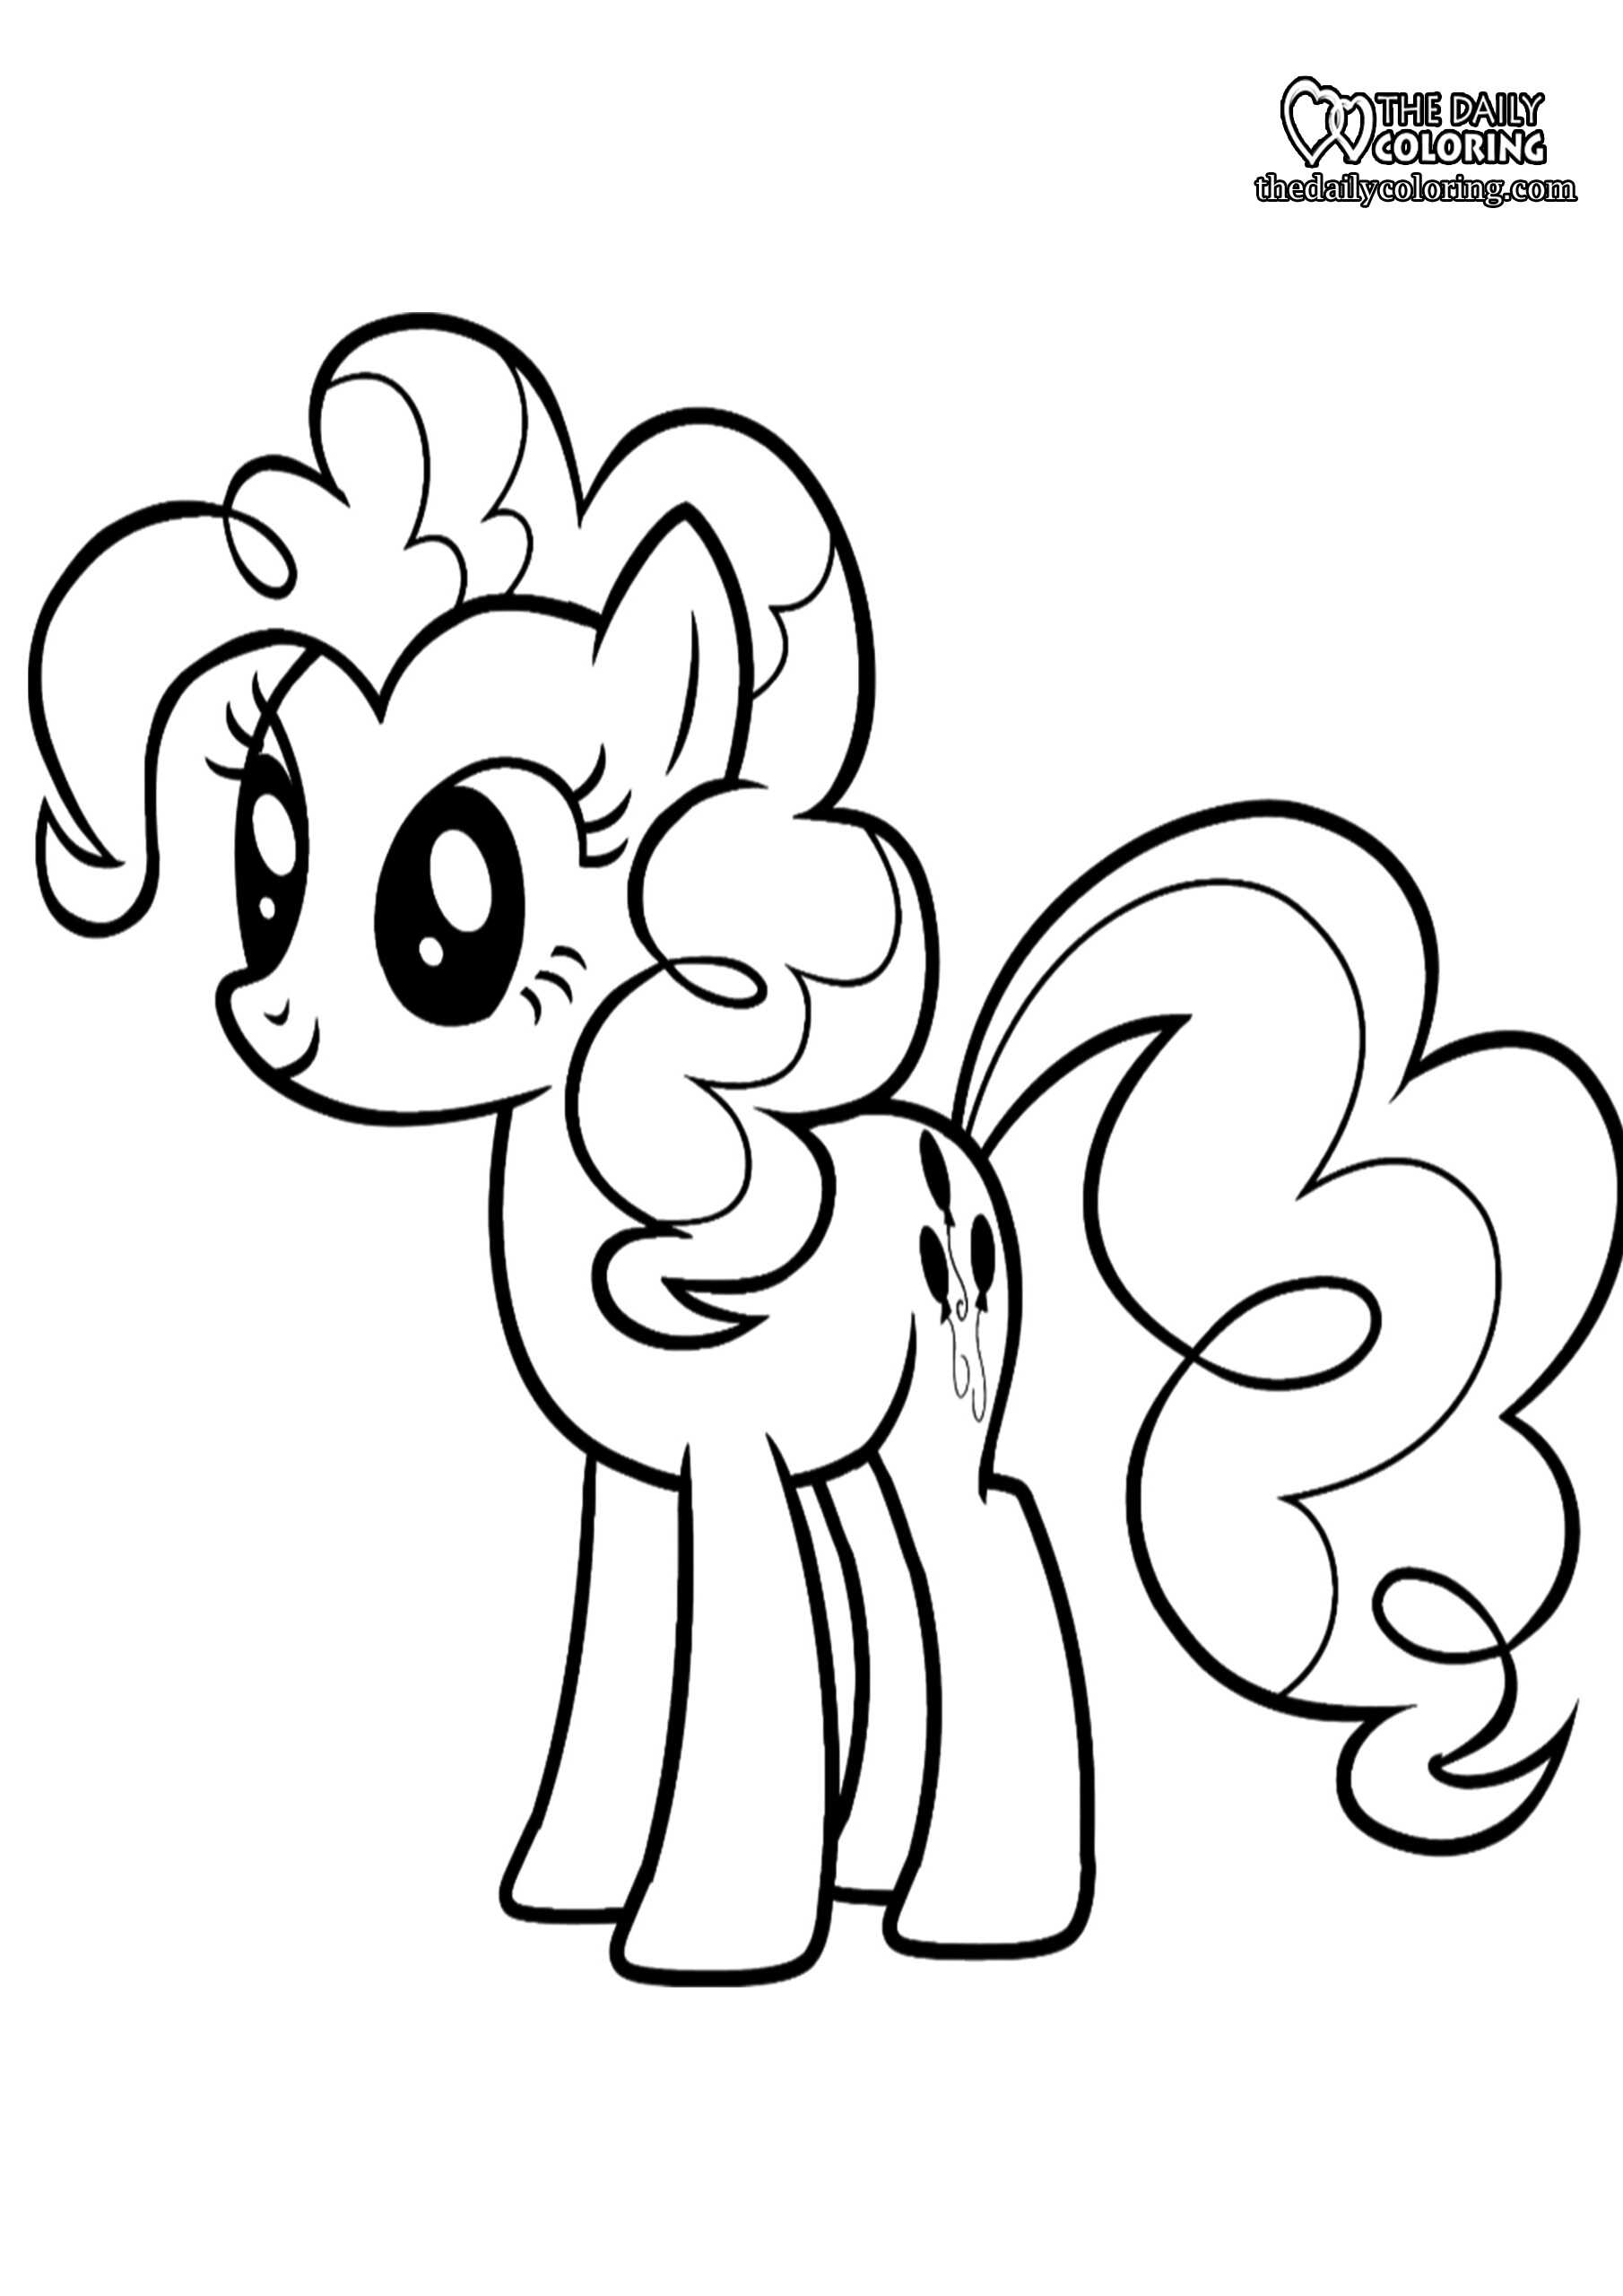 Pony Coloring Pages   The Daily Coloring